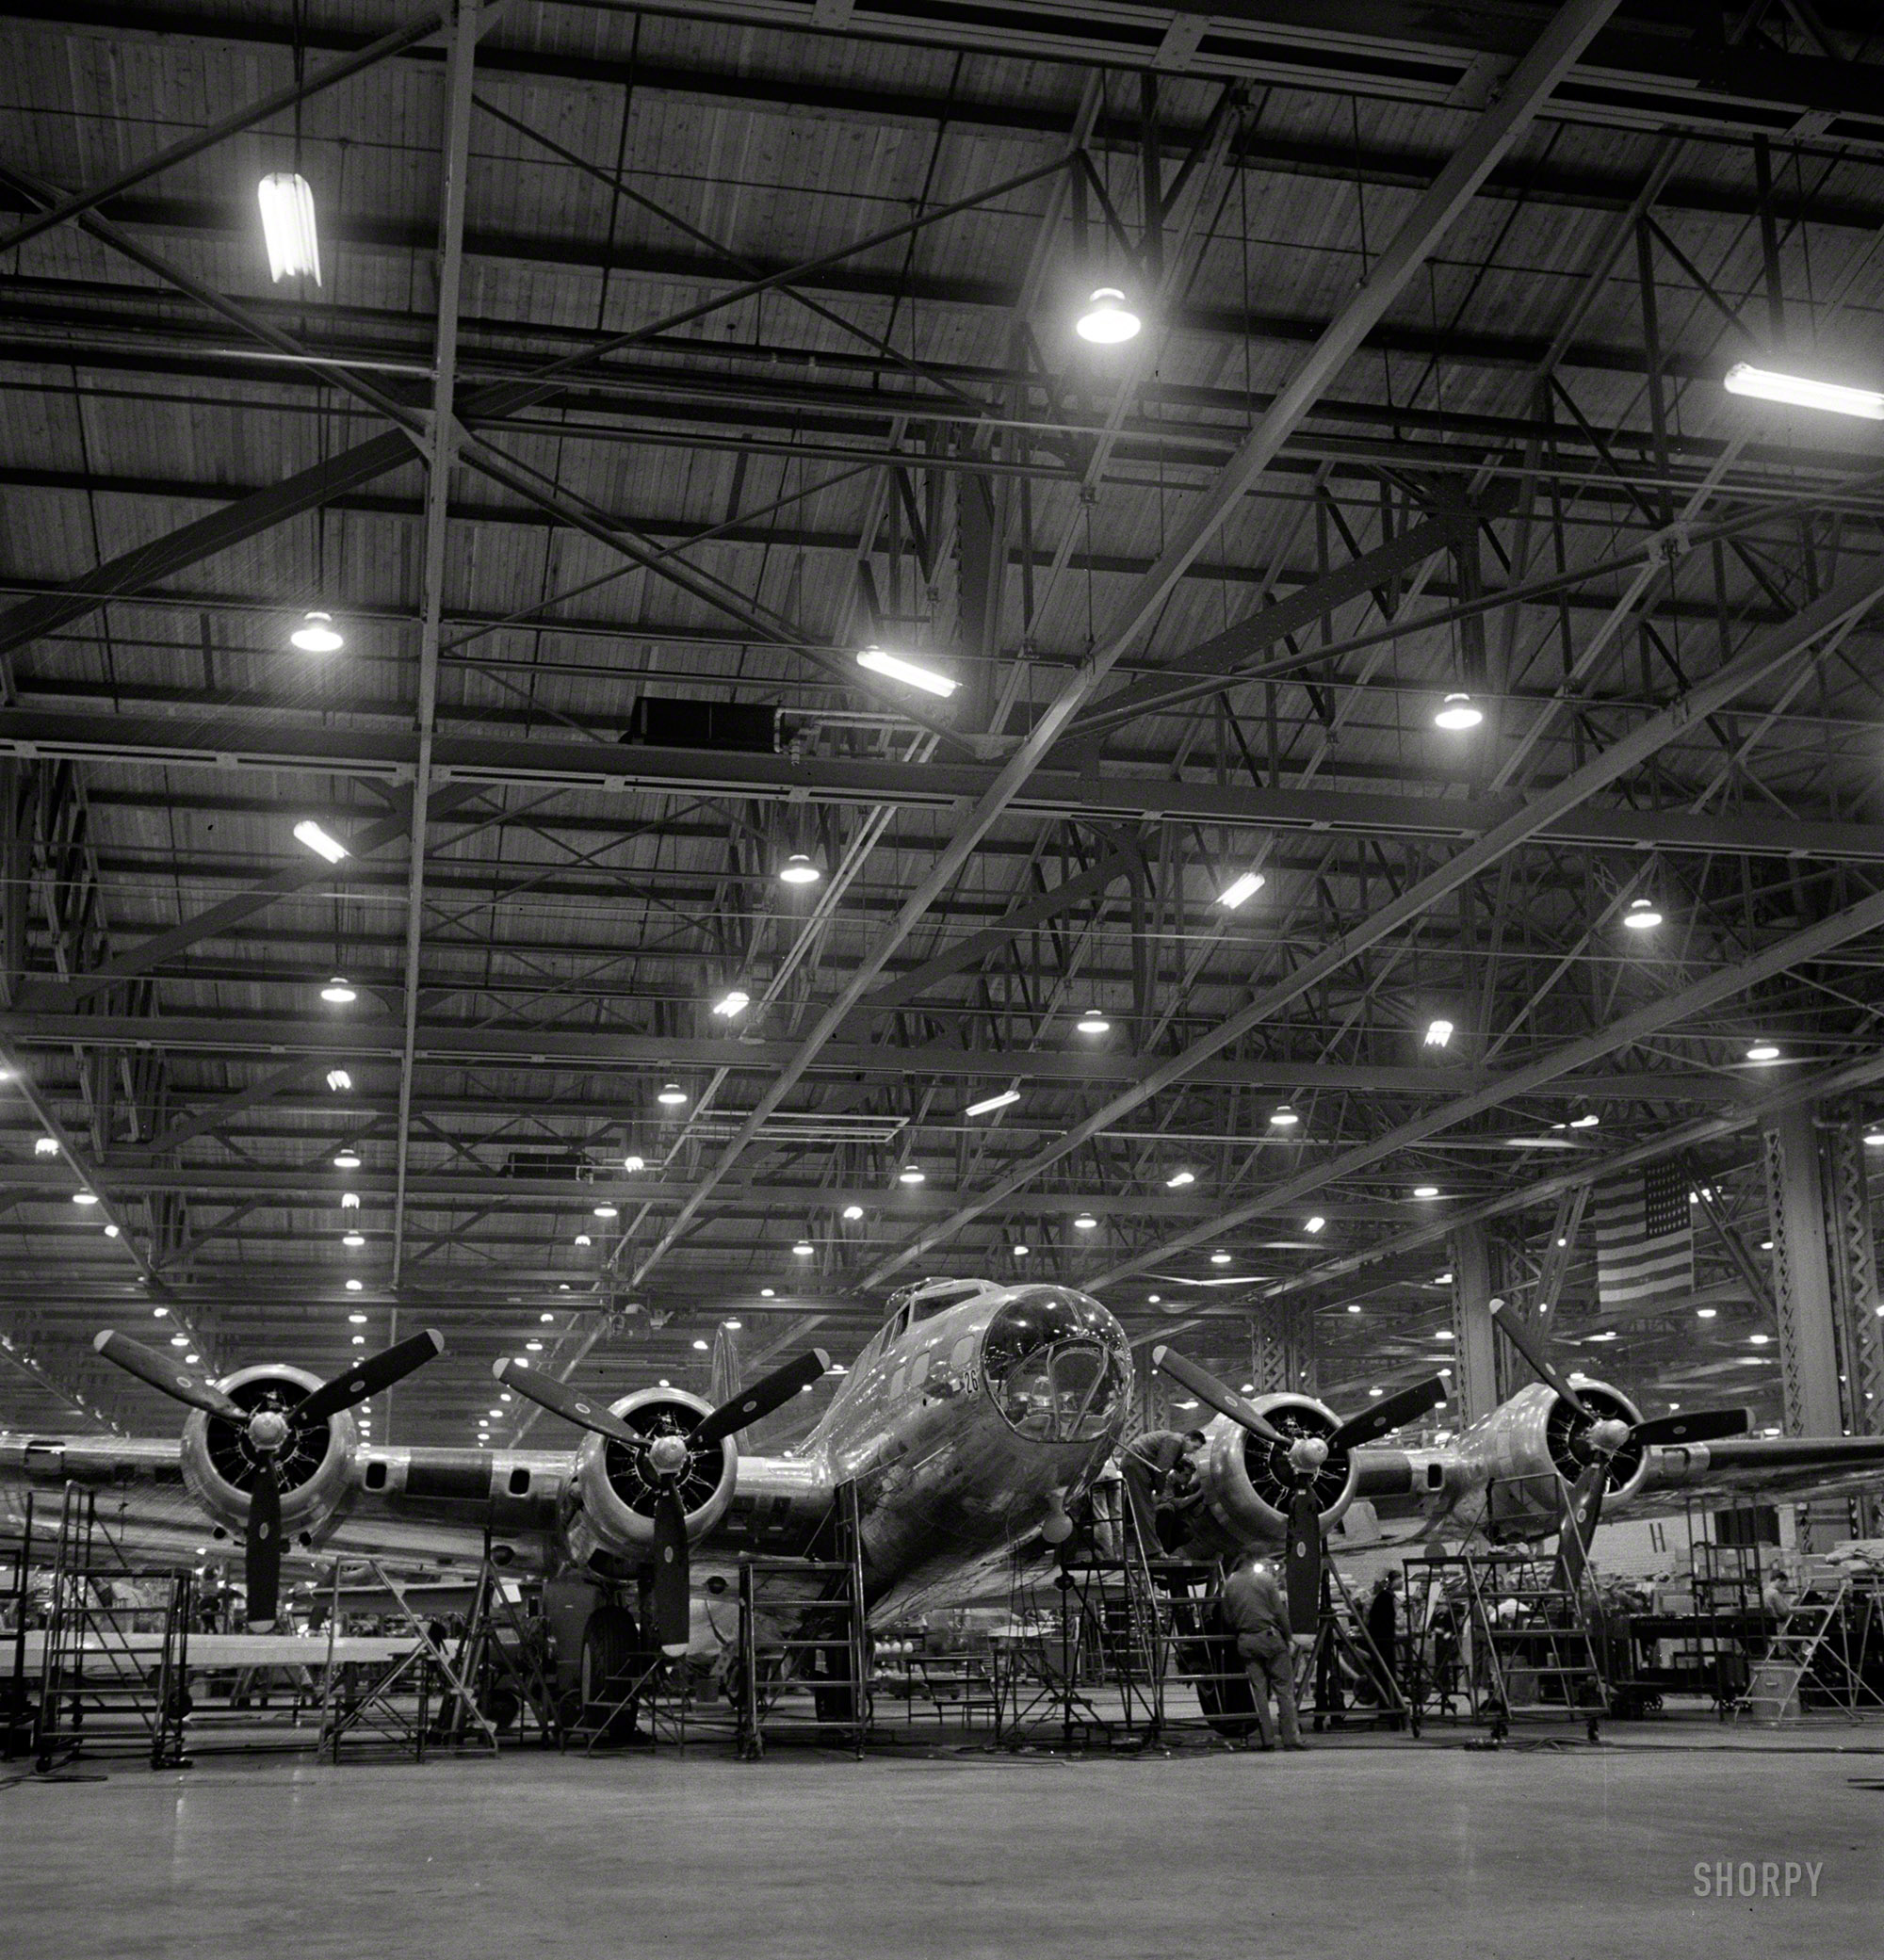 December 1942, a year after Pearl Harbor. "Production. B-17 heavy bomber. A nearly complete B-17F 'Flying Fortress' at Boeing's Seattle plant." Photo by Andreas Feininger for the Office of War Information. View full size.